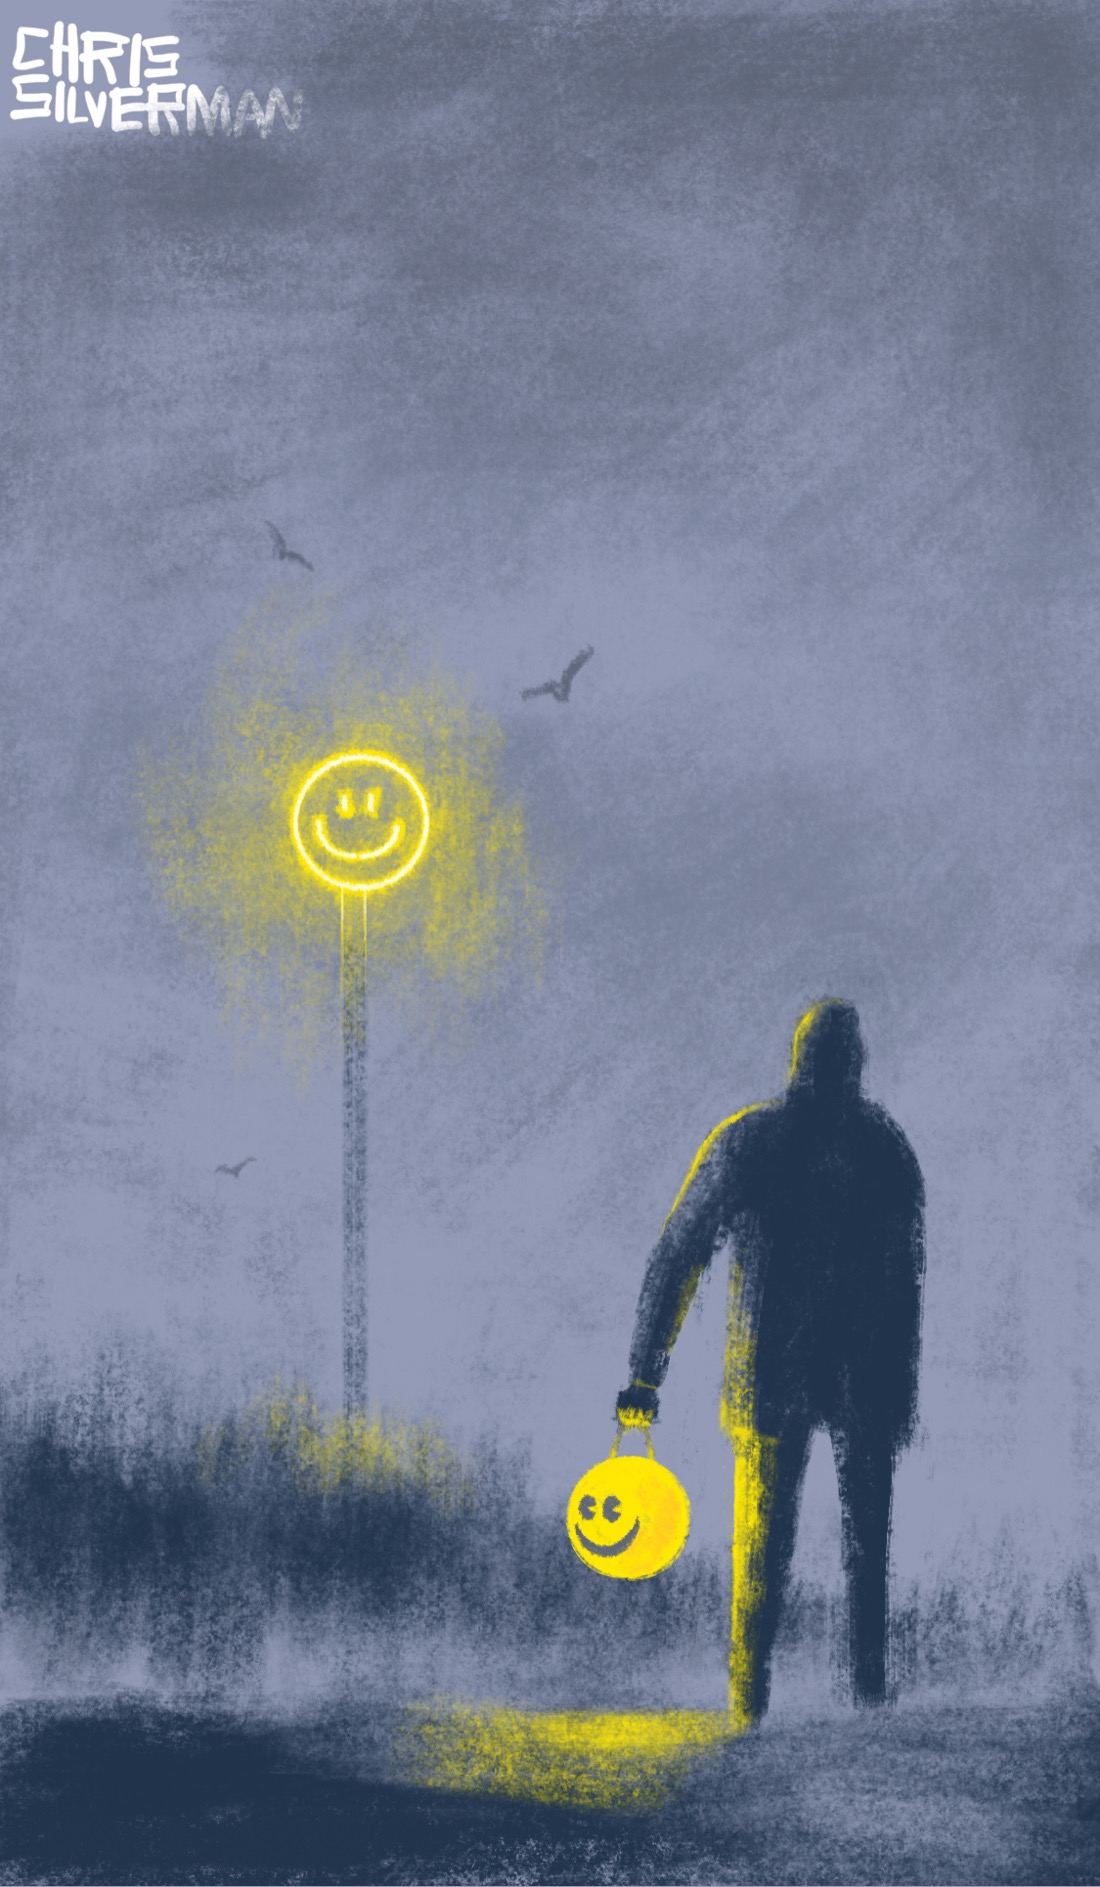 A dark gray day, edging into evening. Fog is visible on the ground. The world is slate-gray. In the distance is a blurry suggestion of a forest. Rising up from the forest is a tall, spindly tower that looks like a radio mast. At the top of the tower is a glowing yellow neon smiley-face. Large birds circle the top of the tower. In the foreground, a person stands looking at the tower, holding in their left hand a glowing spherical smiley-emoji as though it's a lantern. The emoji casts yellow light on the ground, which looks as though it's wet.